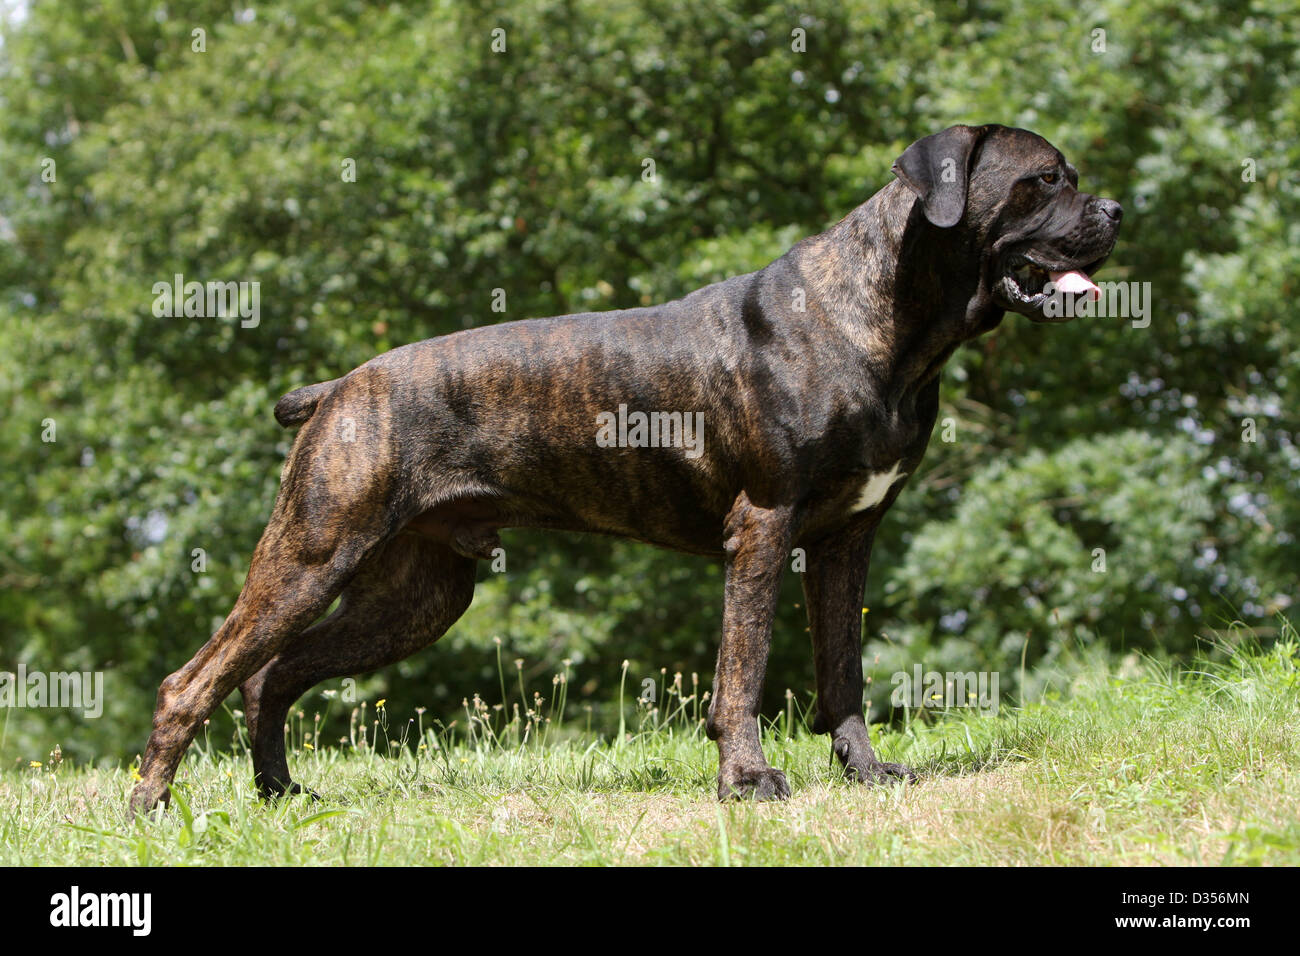 Page 3 - Molosser Hund High Resolution Stock Photography and Images - Alamy